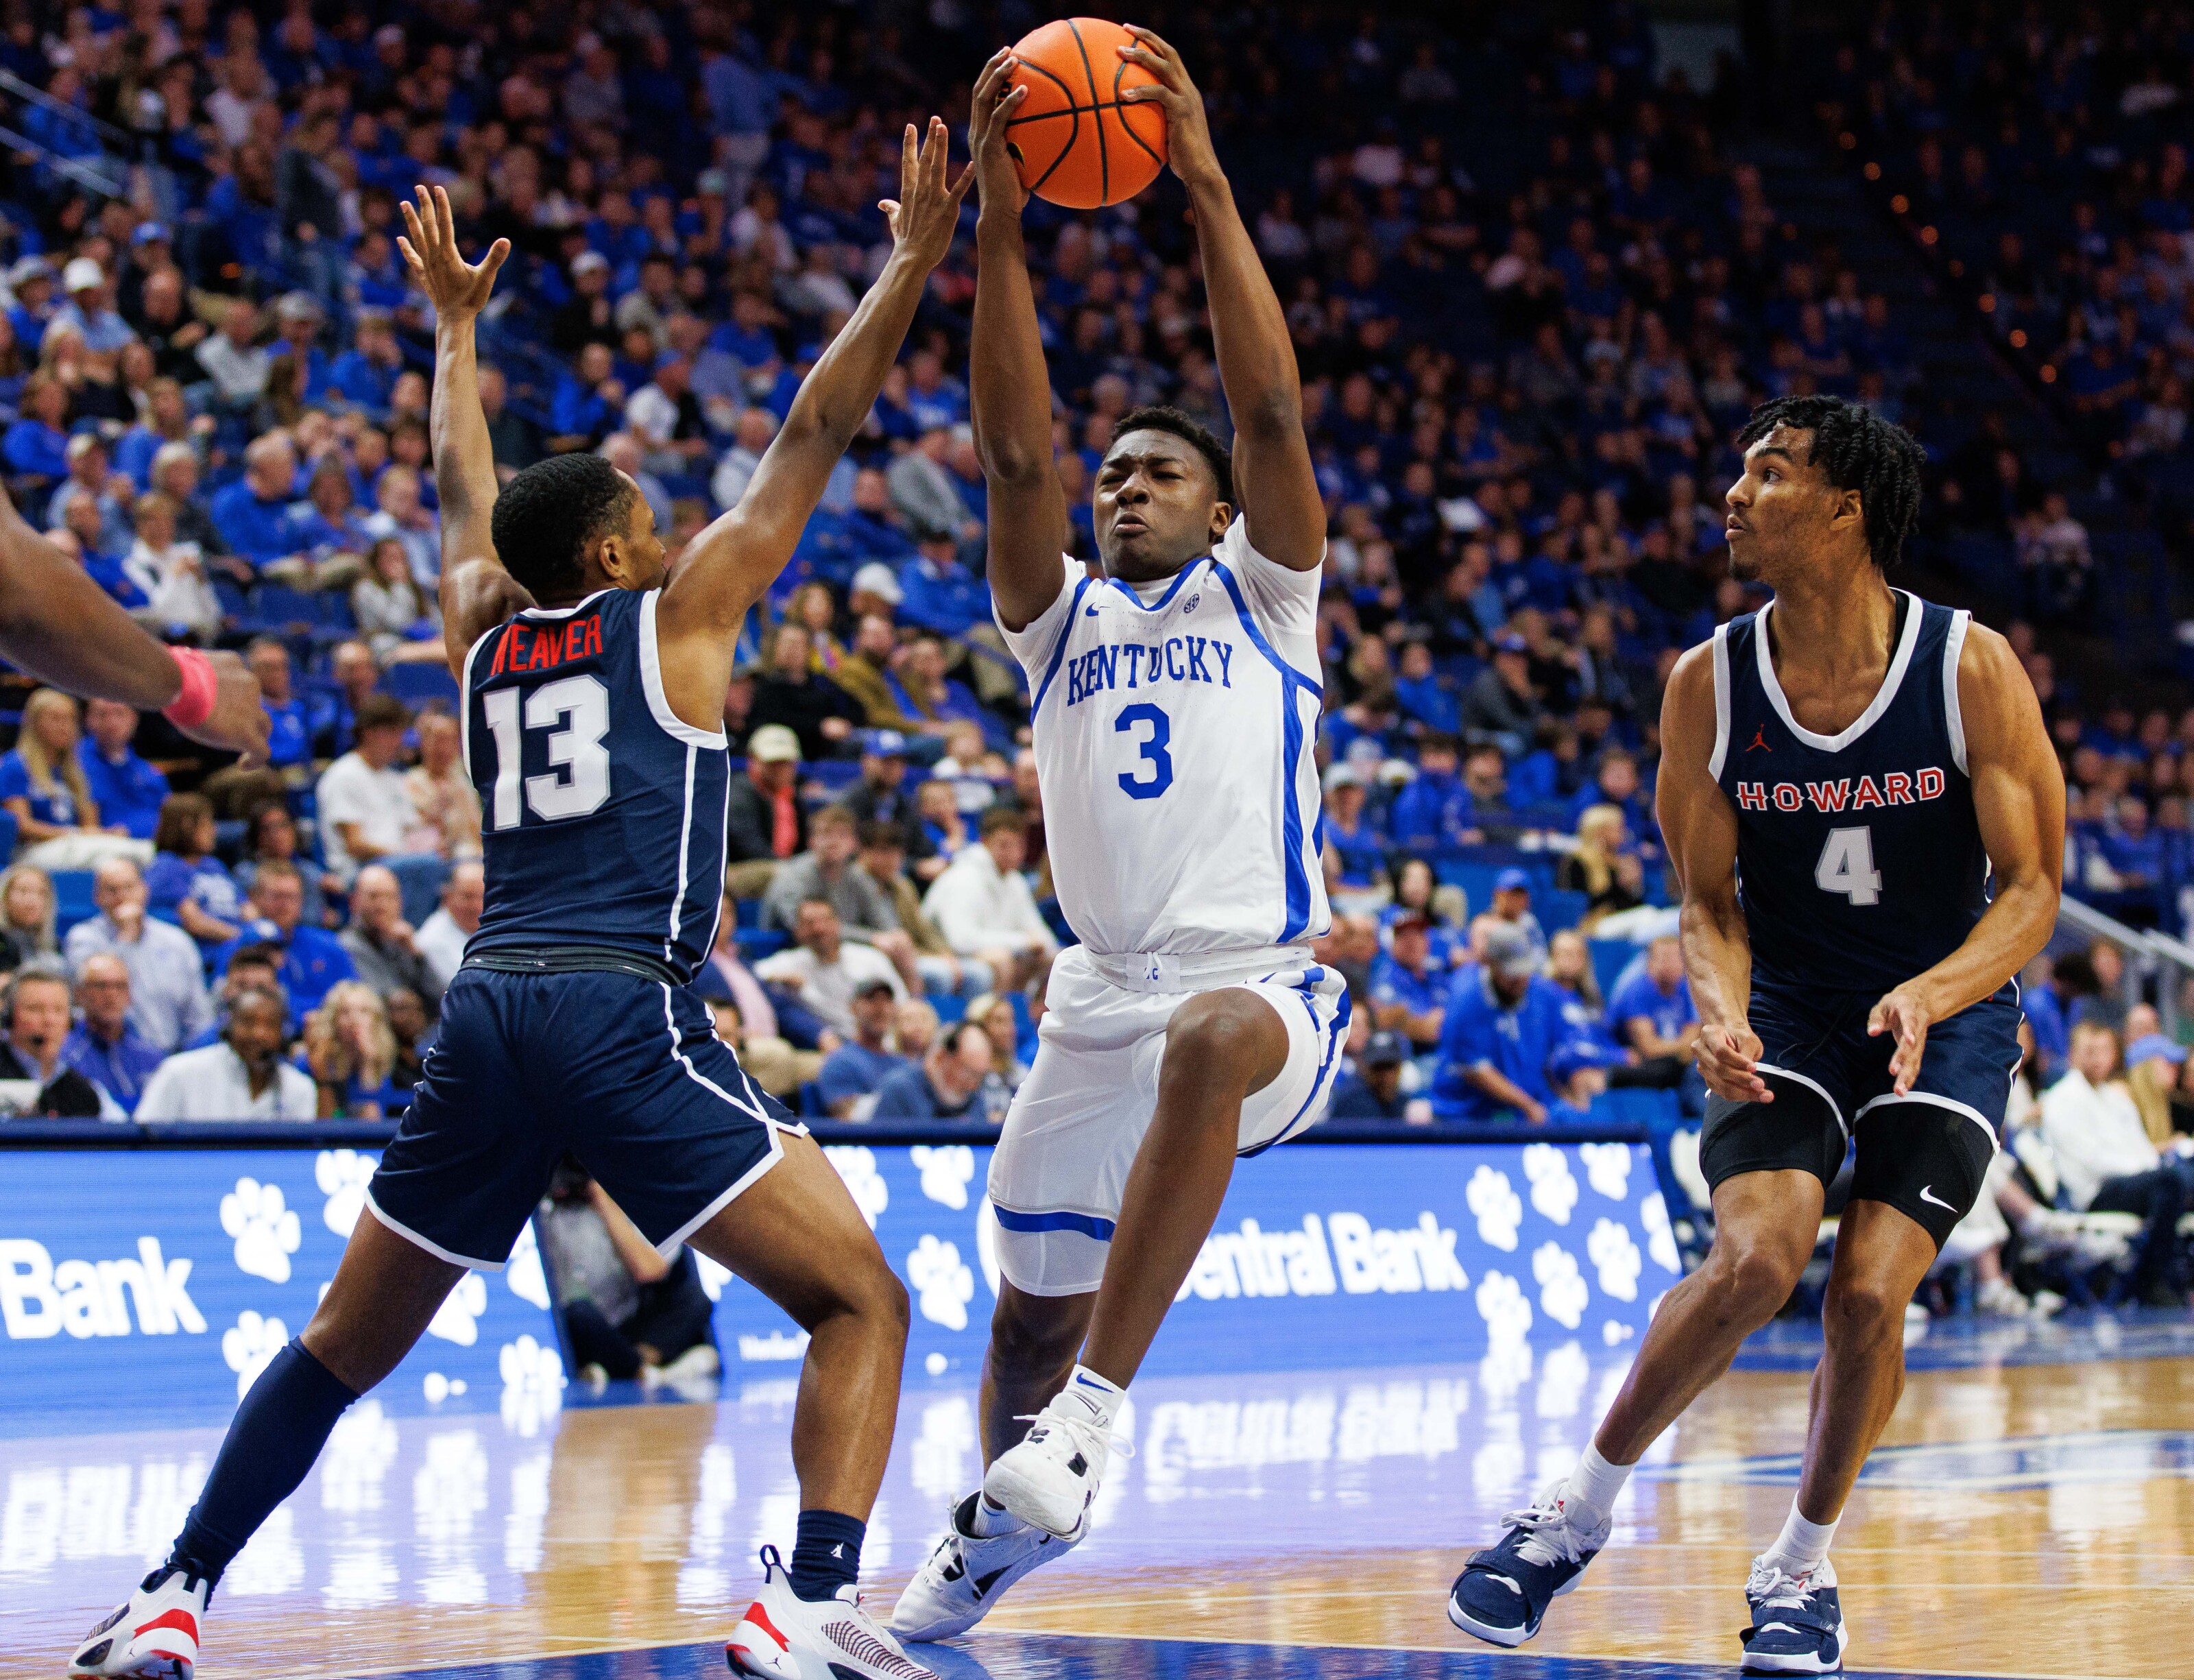 Kentucky Basketball Game today Kentucky vs Duquesne, Line, Predictions, Odds, TV Channel; Live Stream for Basketball Game Nov